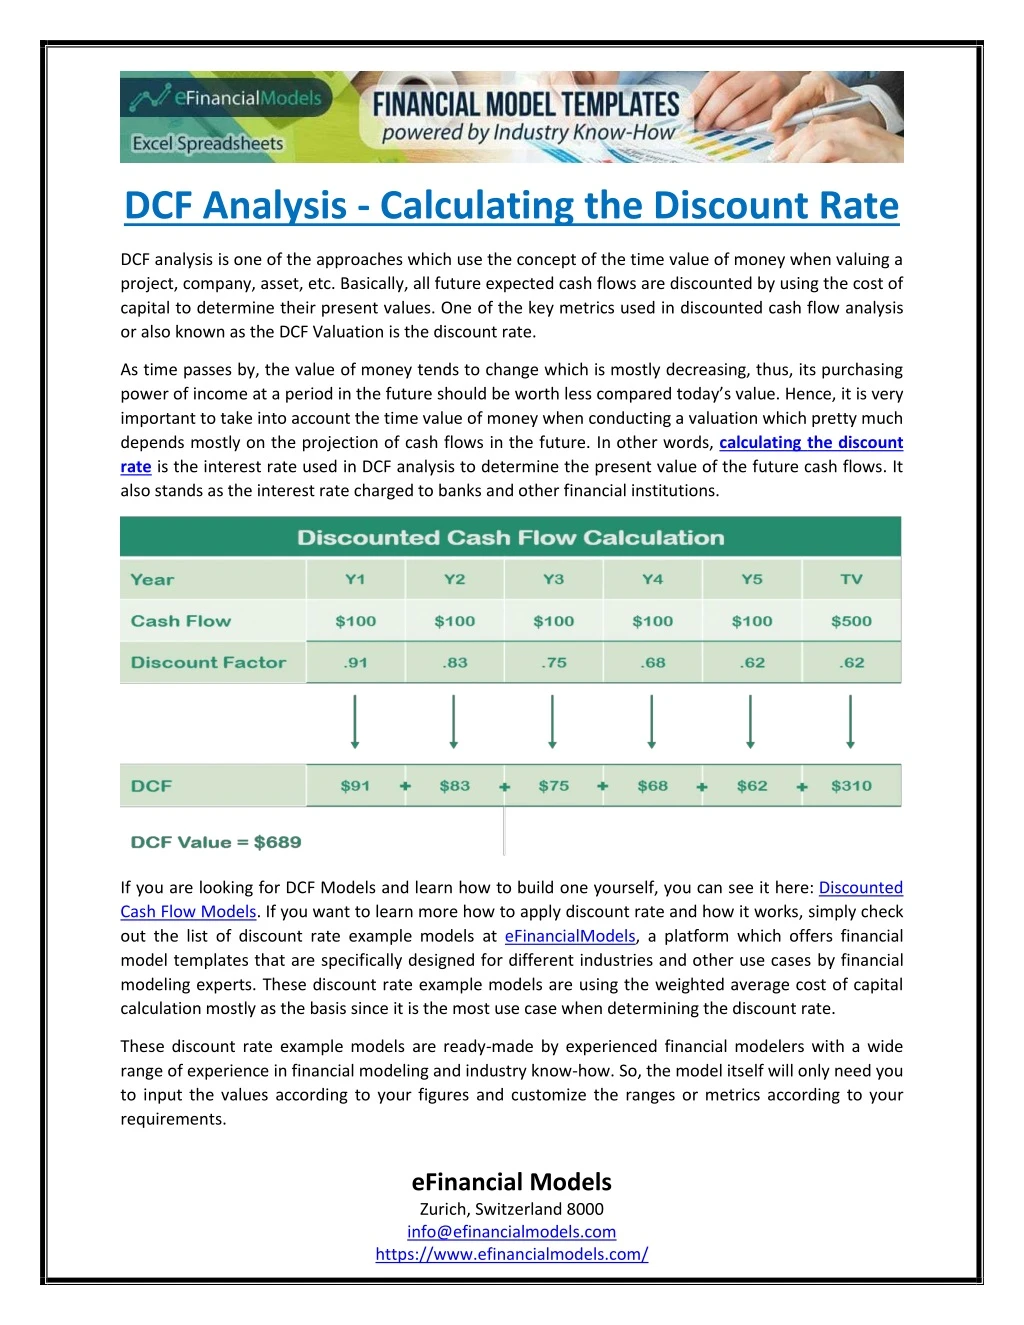 dcf analysis calculating the discount rate